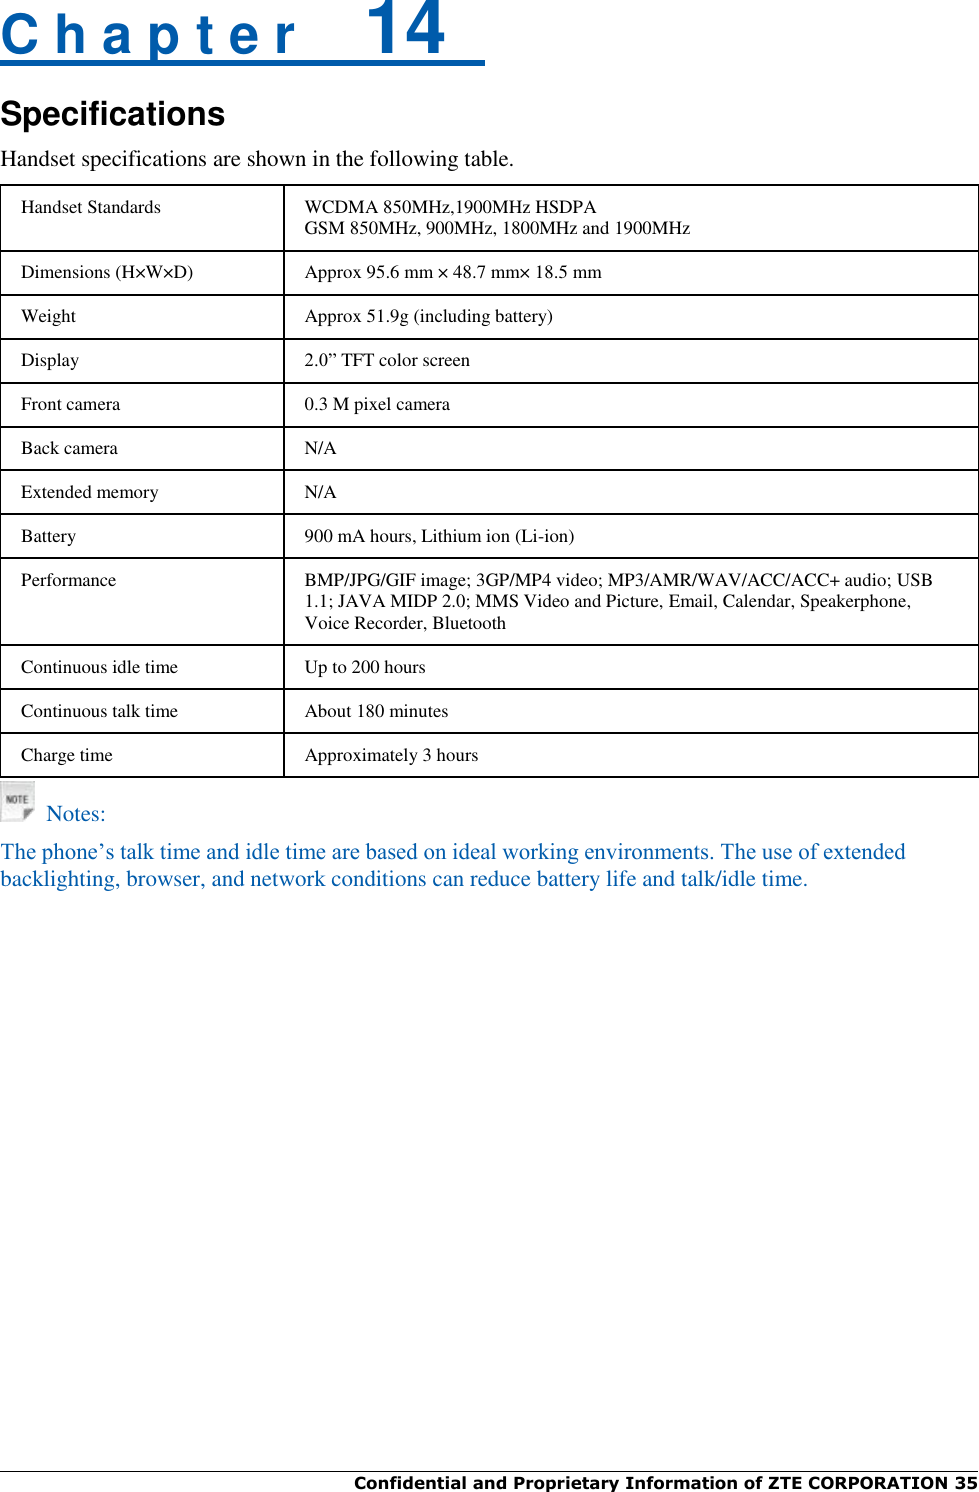 Confidential and Proprietary Information of ZTE CORPORATION 35   C h a p t e r    14   Specifications Handset specifications are shown in the following table. Handset Standards WCDMA 850MHz,1900MHz HSDPA GSM 850MHz, 900MHz, 1800MHz and 1900MHz Dimensions (H×W×D) Approx 95.6 mm × 48.7 mm× 18.5 mm Weight Approx 51.9g (including battery) Display 2.0” TFT color screen Front camera 0.3 M pixel camera Back camera N/A Extended memory N/A Battery 900 mA hours, Lithium ion (Li-ion) Performance BMP/JPG/GIF image; 3GP/MP4 video; MP3/AMR/WAV/ACC/ACC+ audio; USB 1.1; JAVA MIDP 2.0; MMS Video and Picture, Email, Calendar, Speakerphone, Voice Recorder, Bluetooth Continuous idle time Up to 200 hours Continuous talk time About 180 minutes Charge time Approximately 3 hours    Notes: The phone‟s talk time and idle time are based on ideal working environments. The use of extended backlighting, browser, and network conditions can reduce battery life and talk/idle time. 